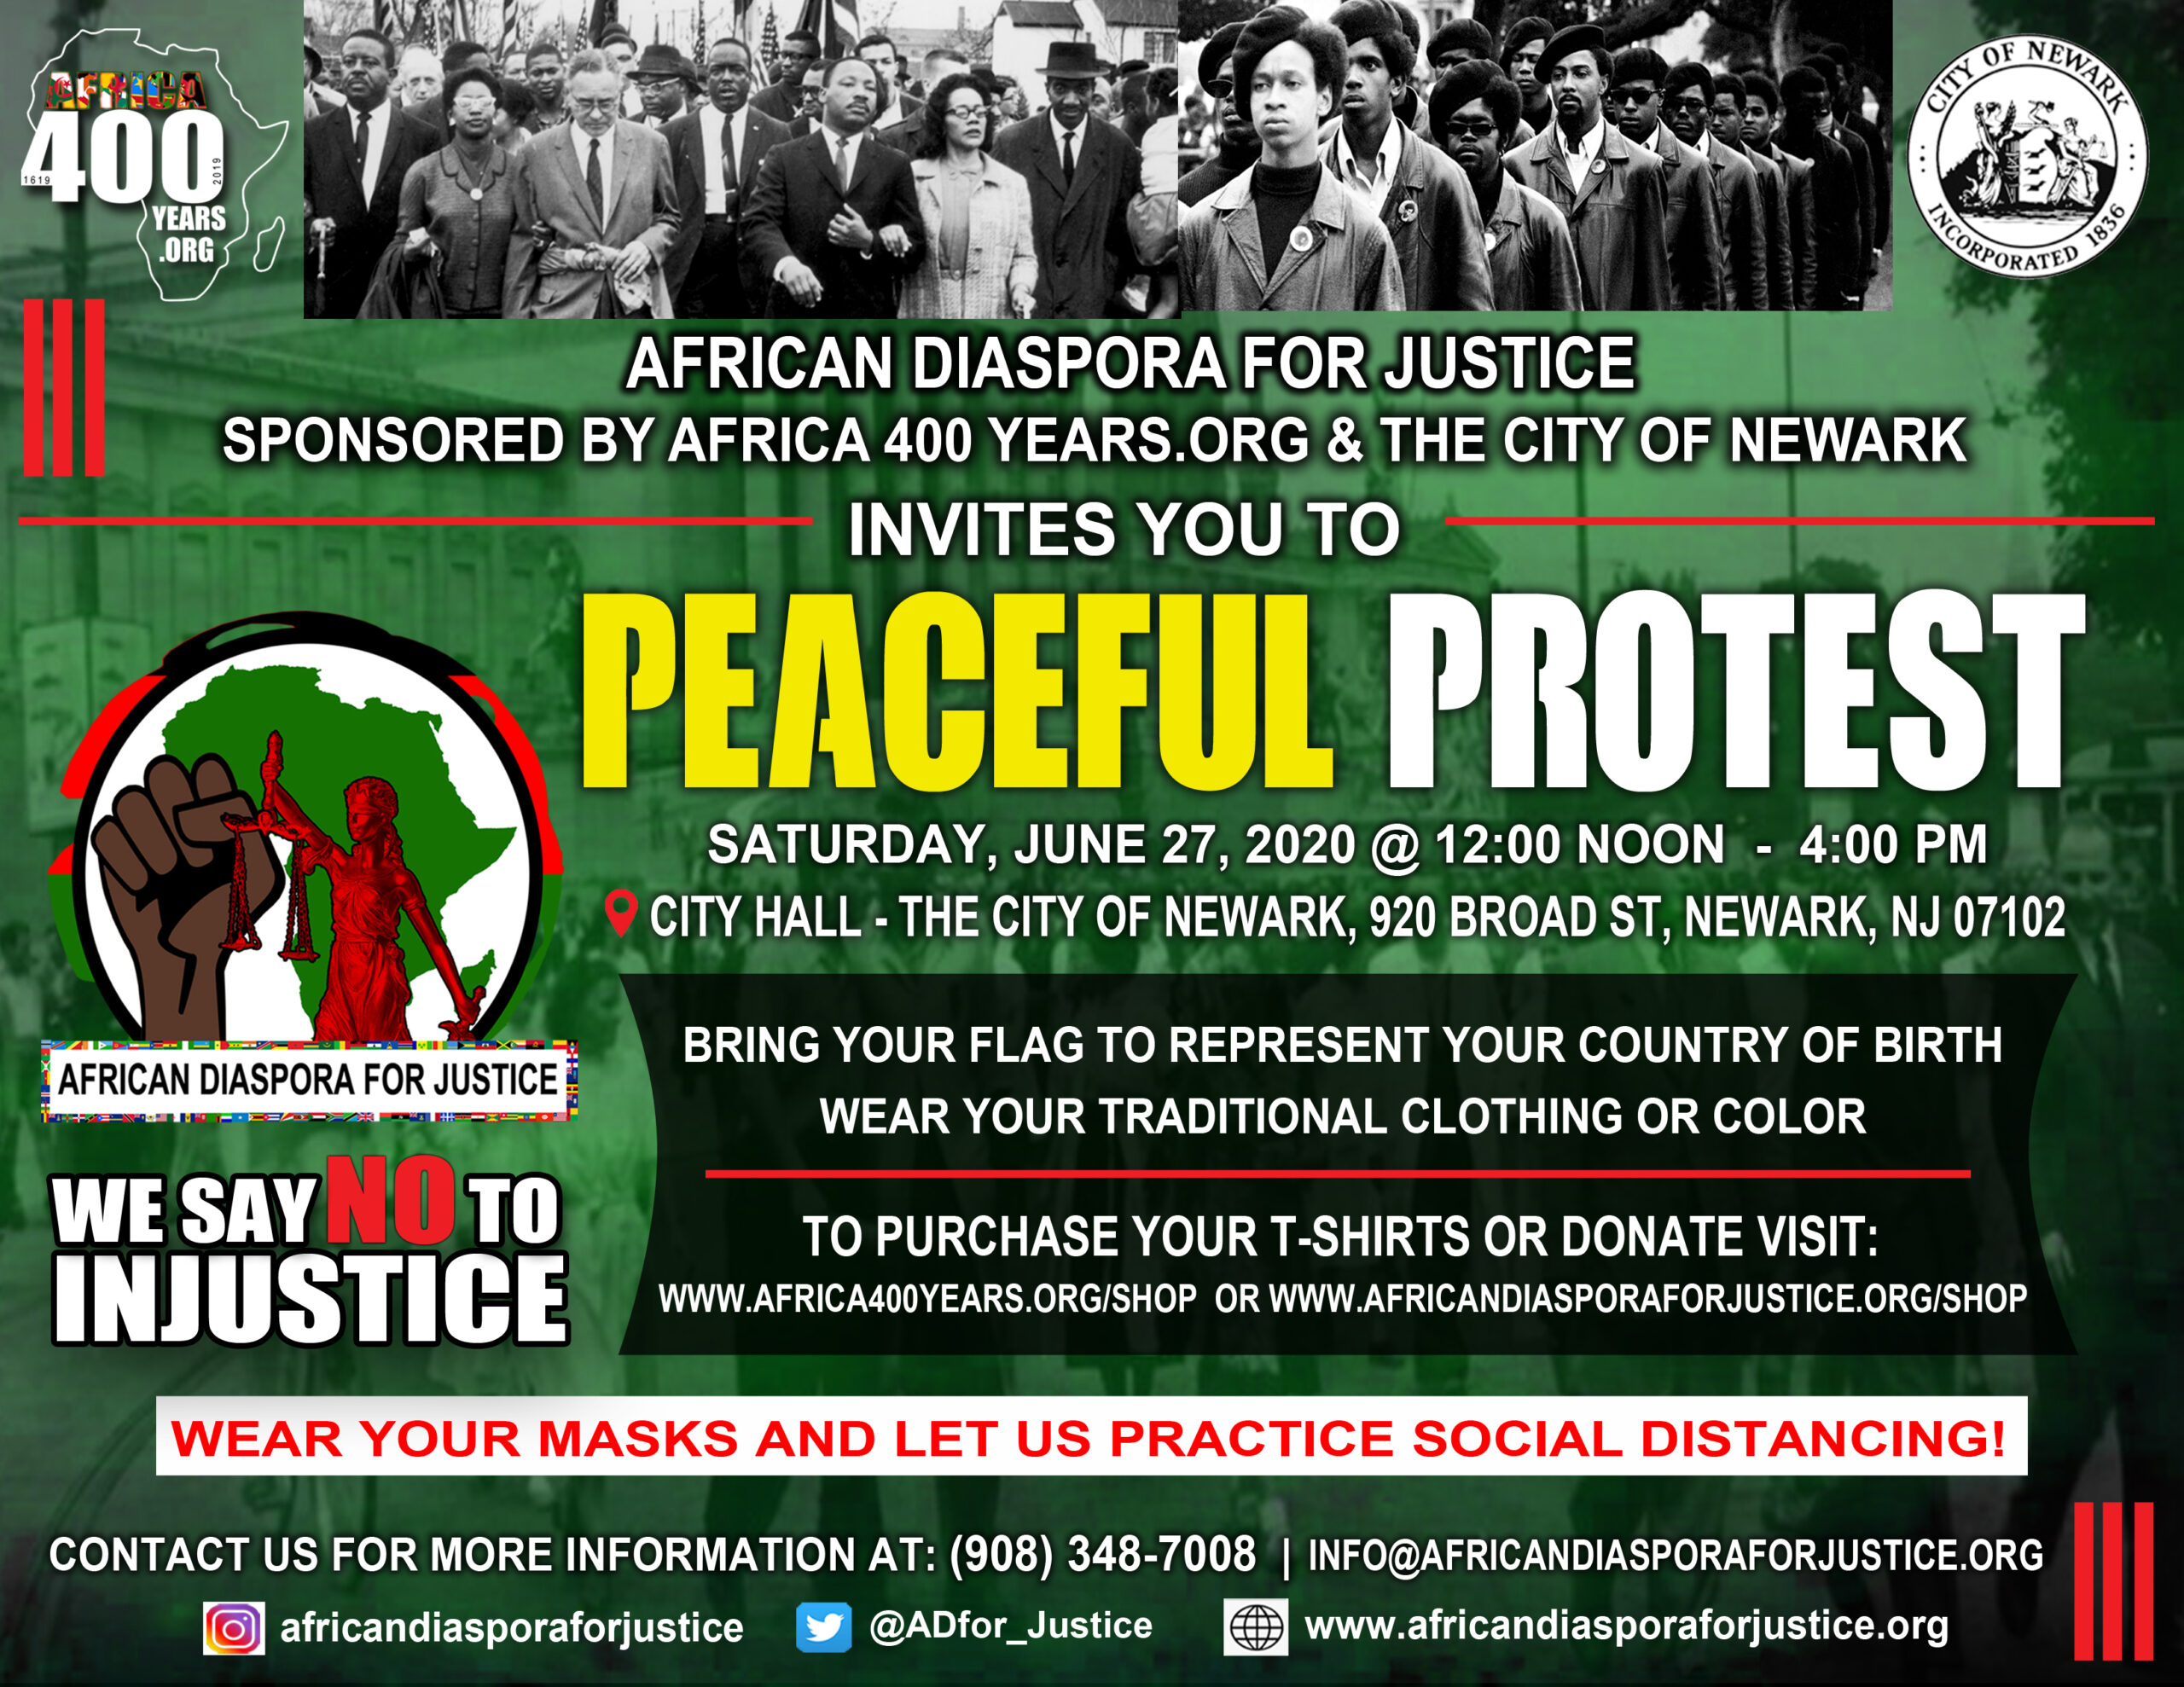 AD4 JUSTICE PEACE PROTEST FLYER